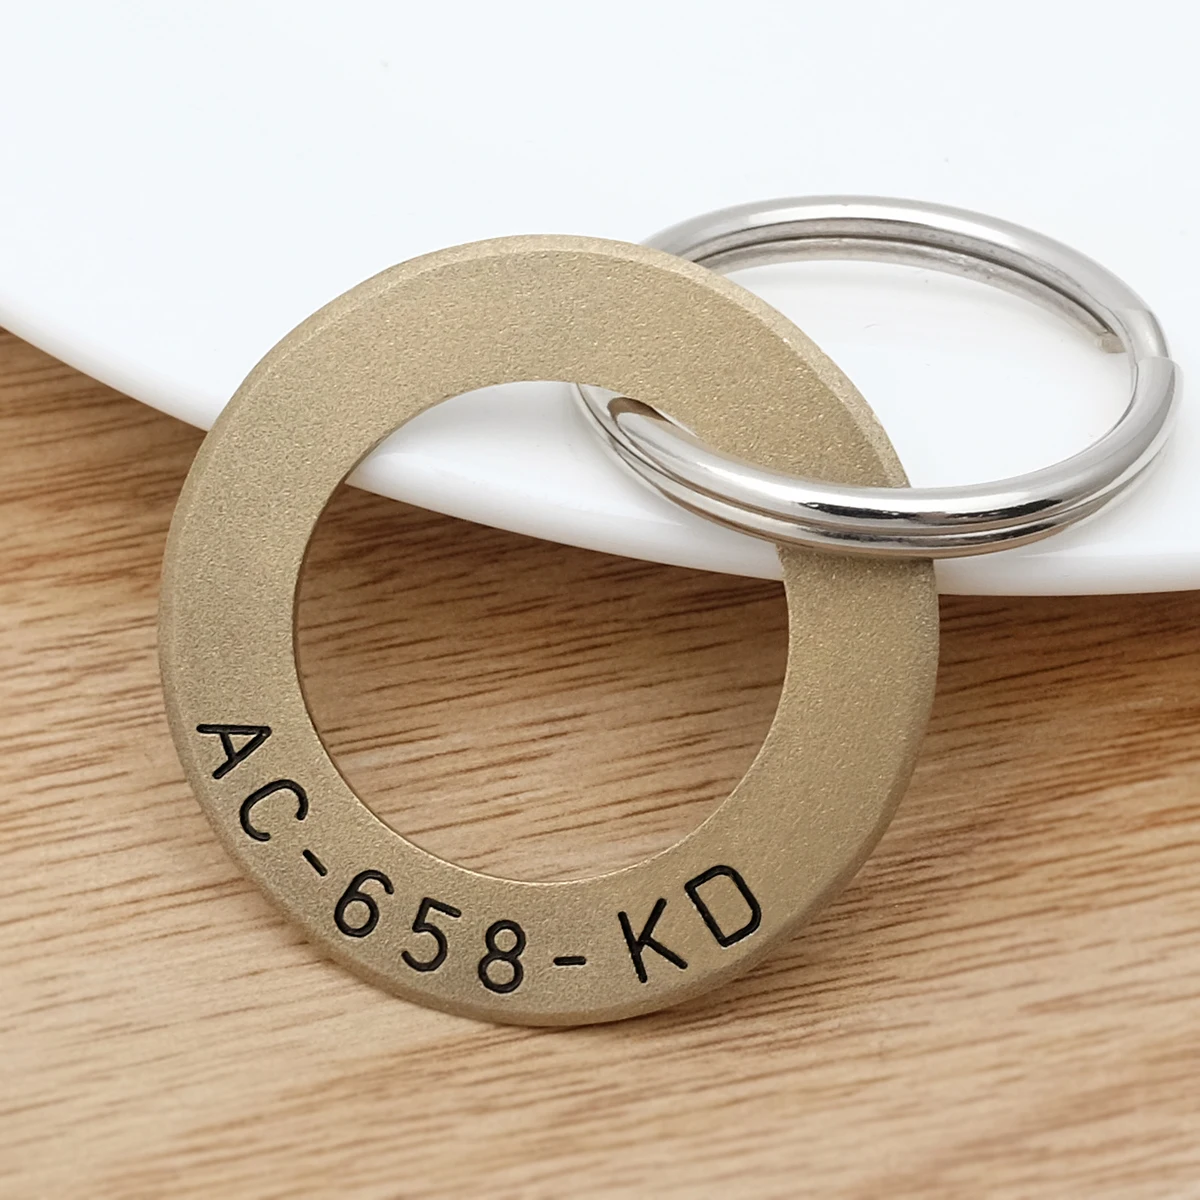 Personalized Car Keychain Custom Engraved Number Plate Key Chain Customize License Plate Key ring Car Reg New Driver Gift personalized car number plate keychain custom car plate keychain car license plate keychain new driver gift anti lost keyring